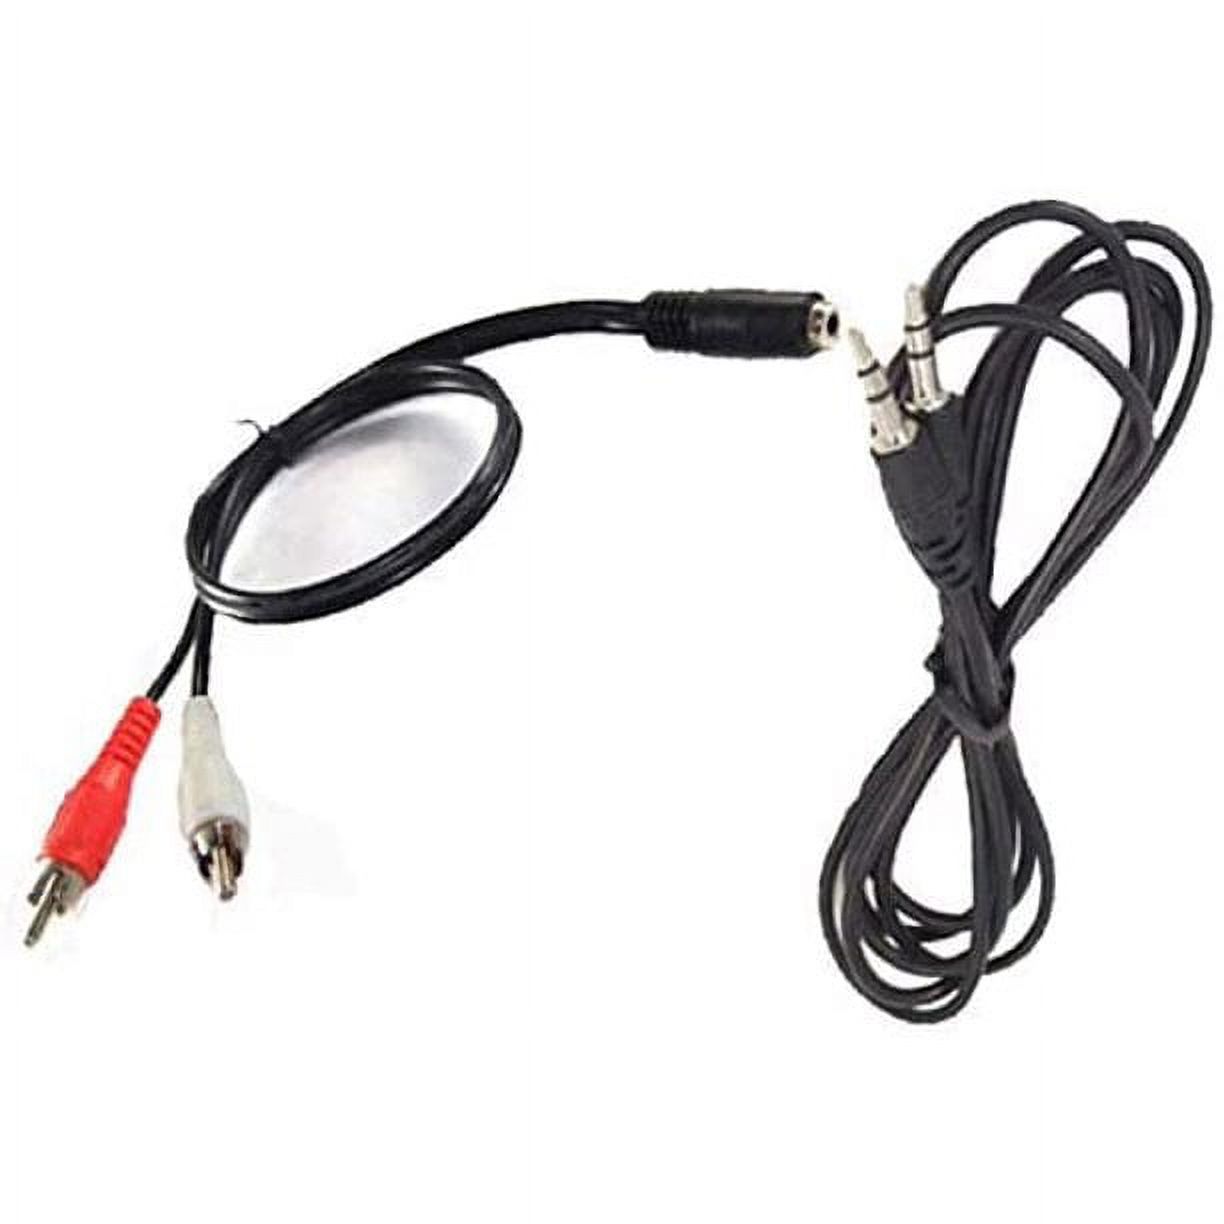 UPBRIGHT AUX IN Audio RCA Cable Cord For VIZIO 29" 32??38" 40" 42" Home Theater Sound Bar Wireless Subwoofer SoundBar Speaker (To Convert AUX Input stereo audio plug into two mono RCA plugs ) - image 1 of 5